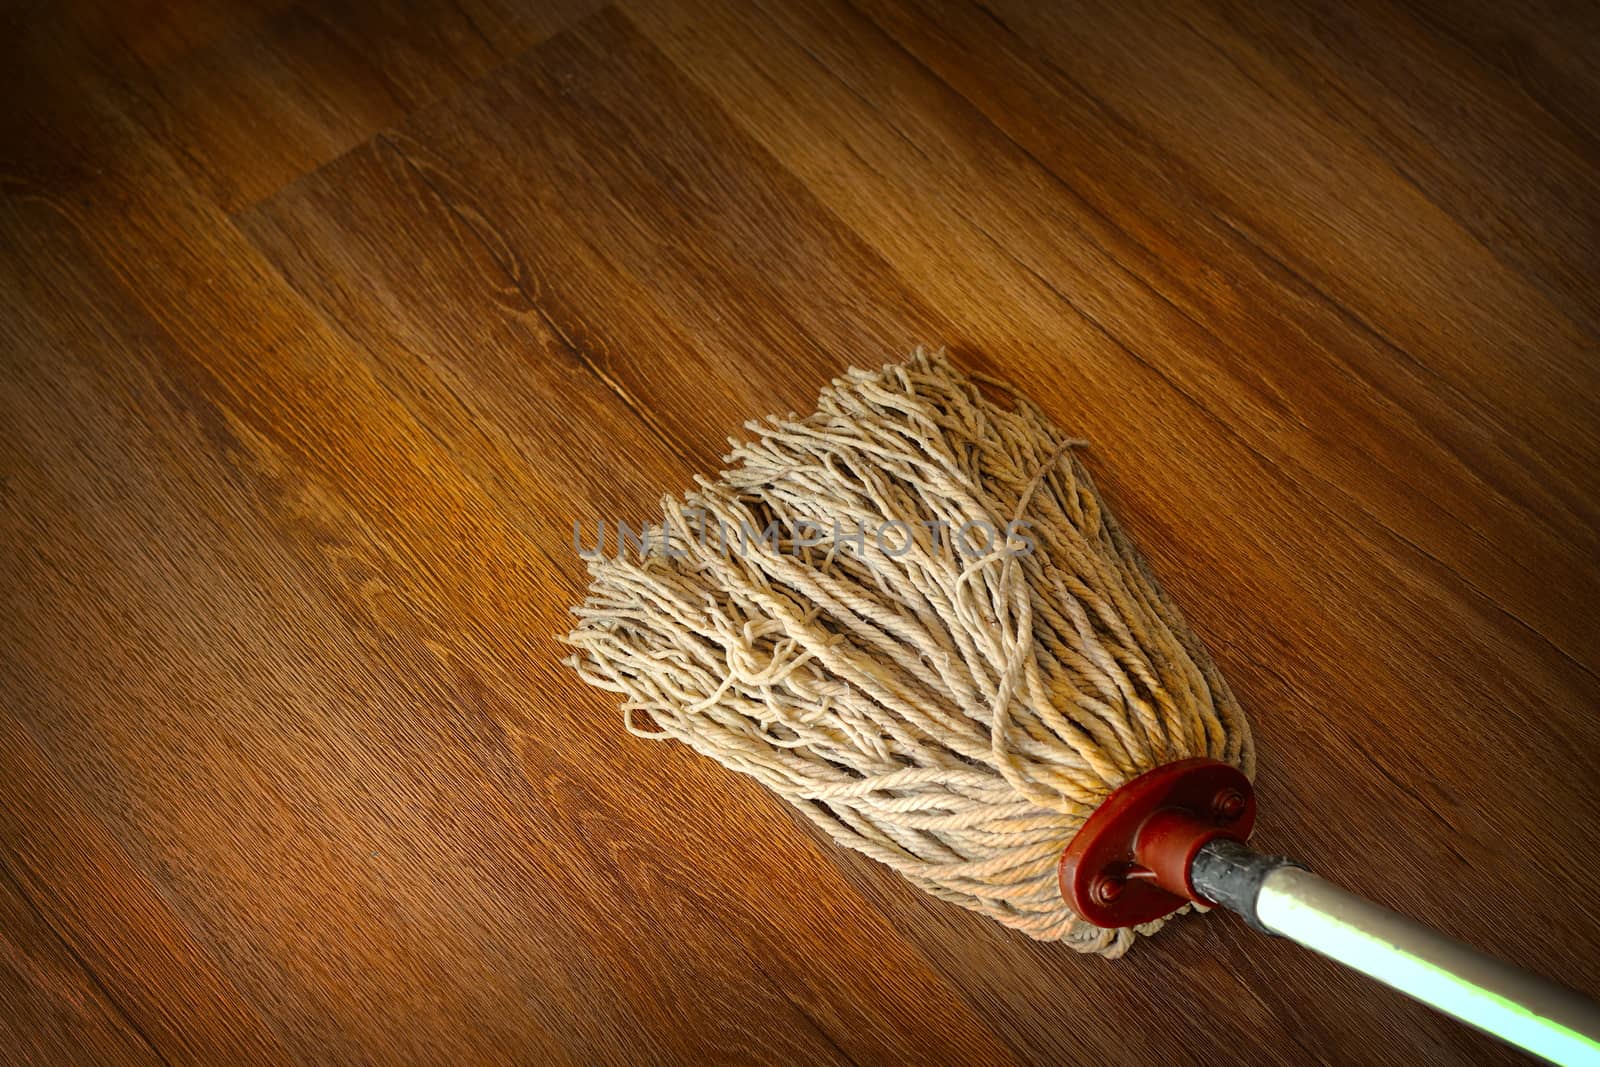 washing the wood floor with an old mop by taviphoto